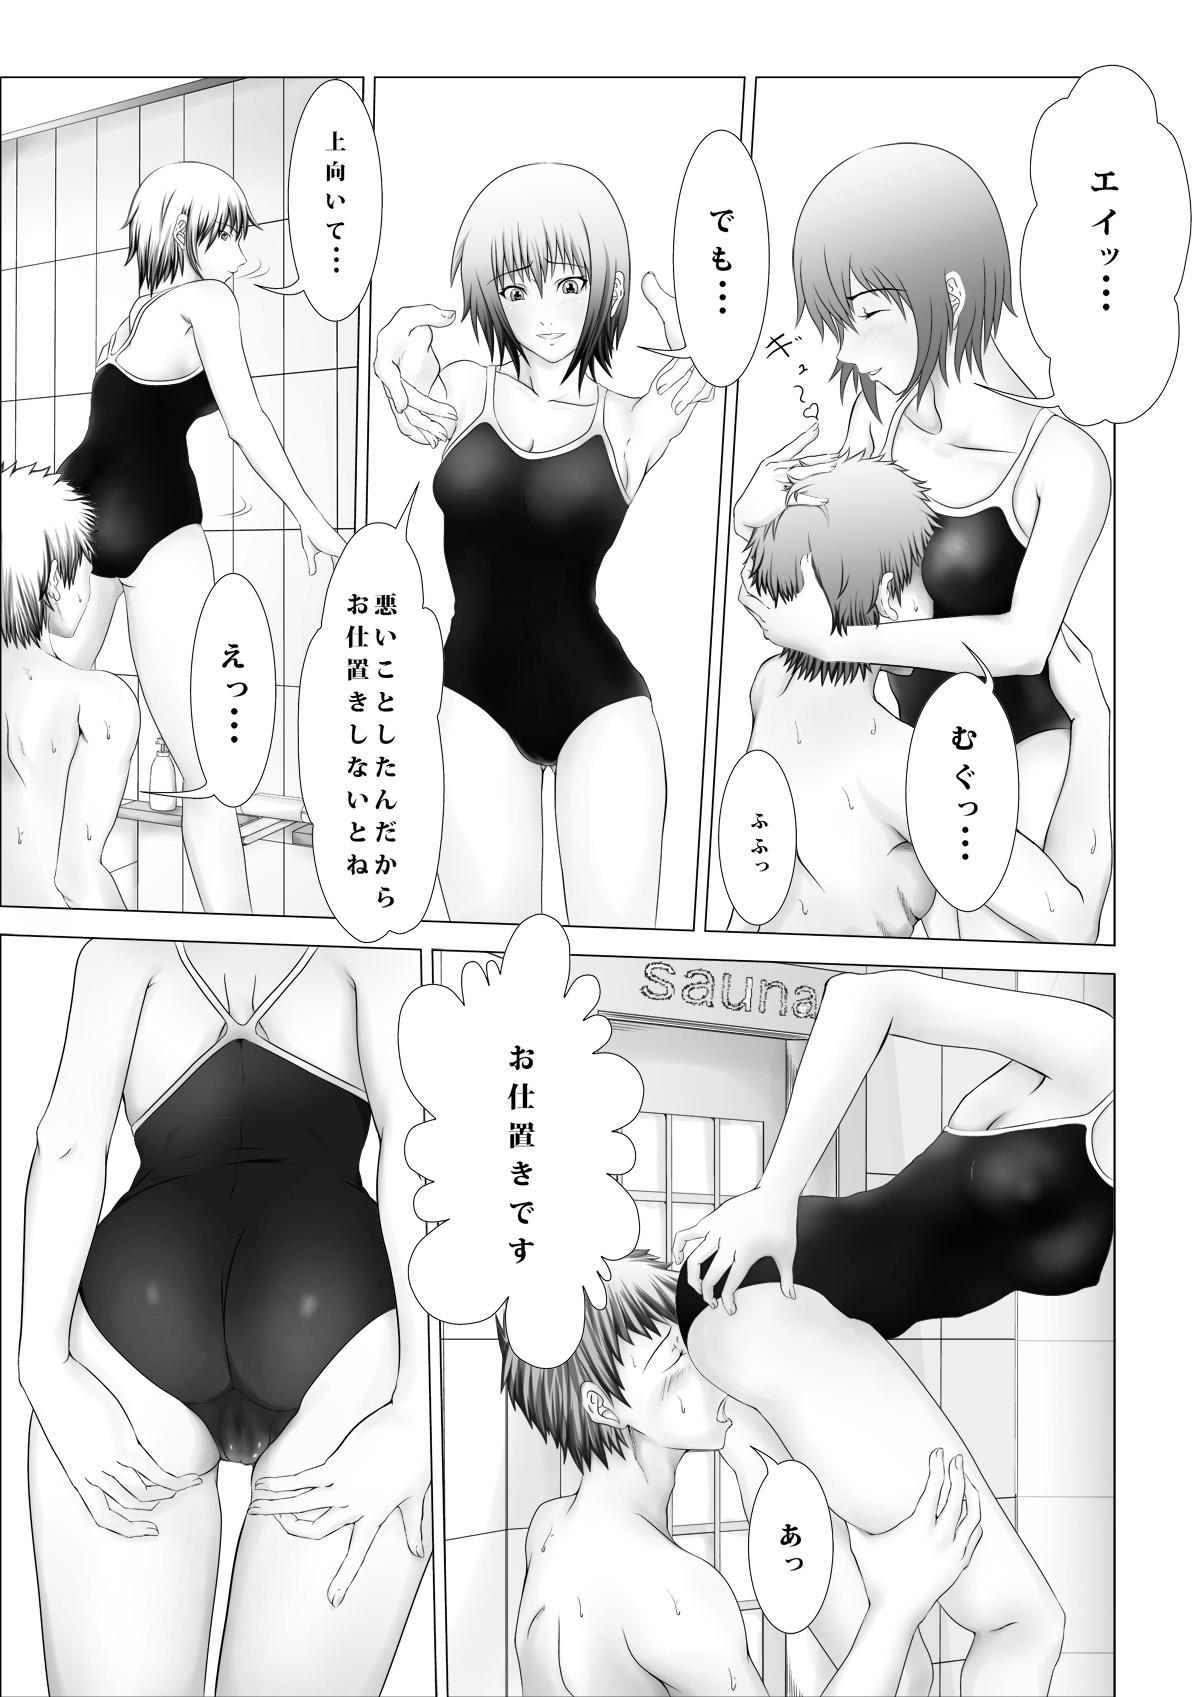 Perfect Ass 急所責めマニアックスvol.3 Tia - Page 8